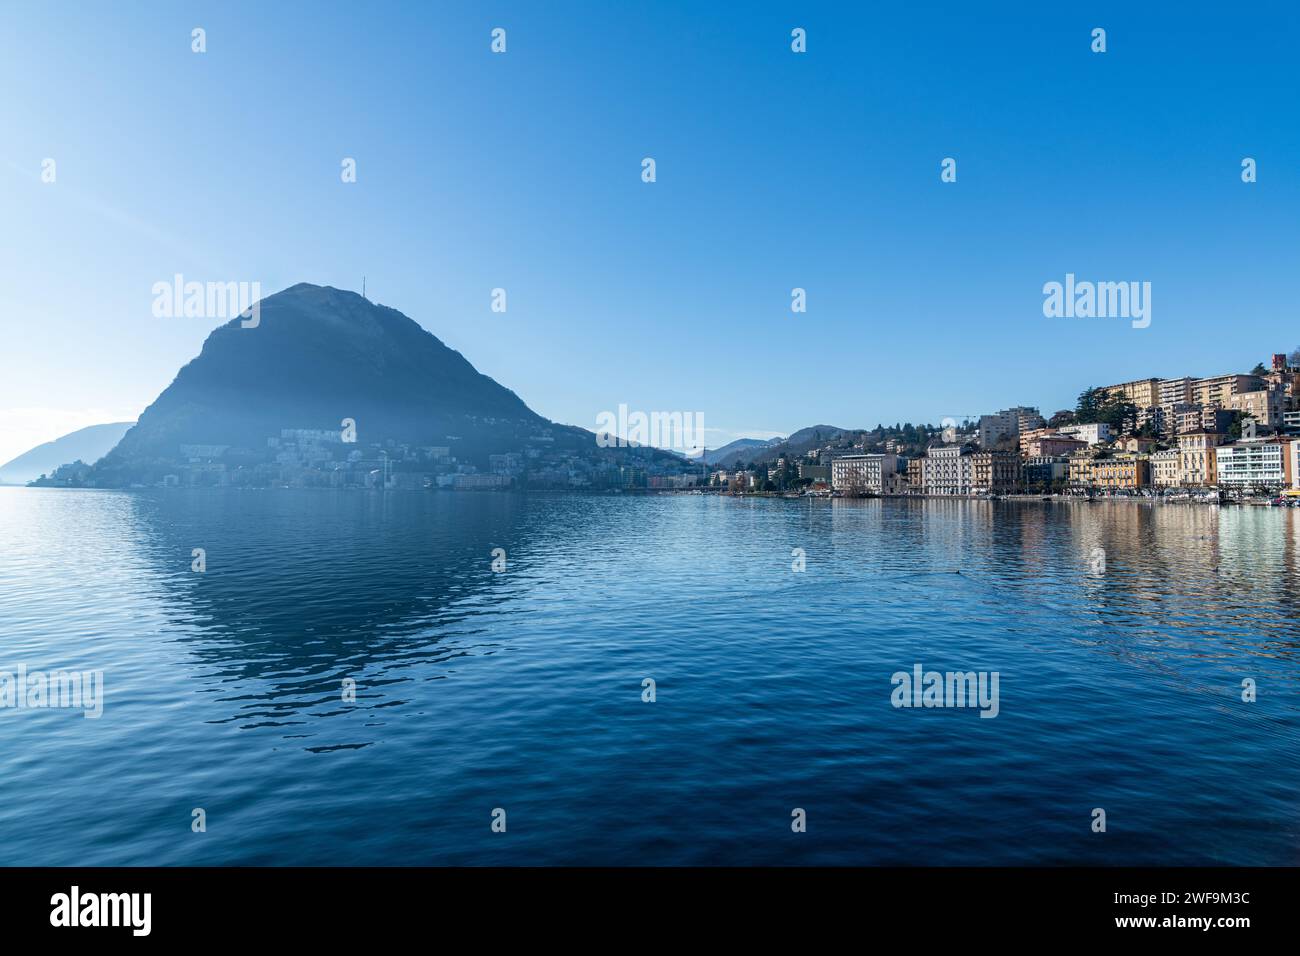 A view of buildings reflected in the water of Lake Lugano in Switzerland Stock Photo